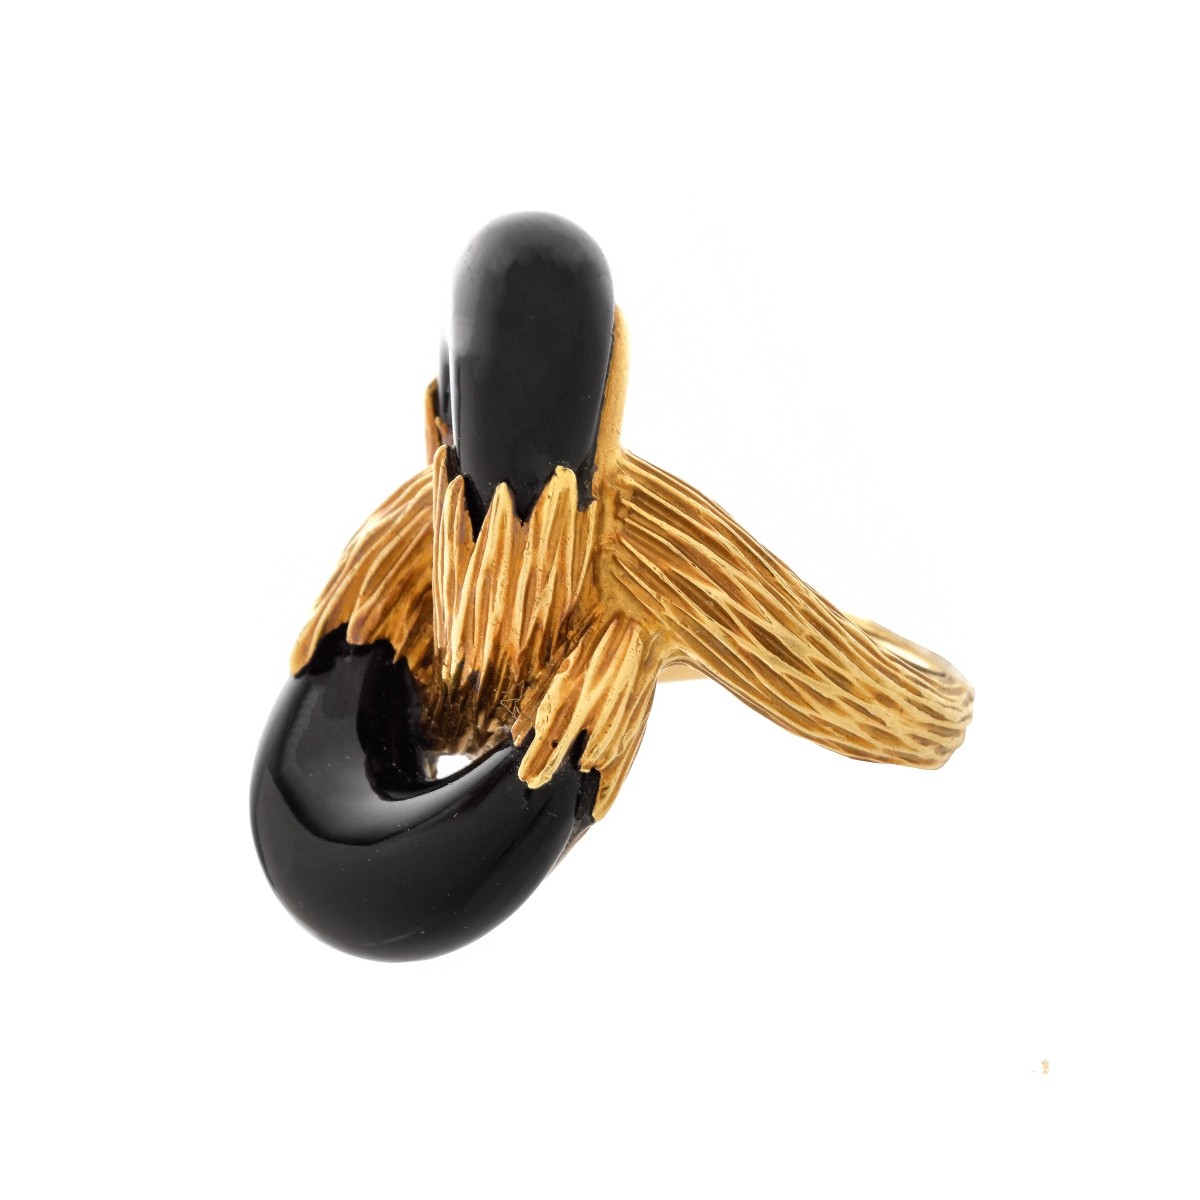 Vintage Onyx and 18K Knot Ring